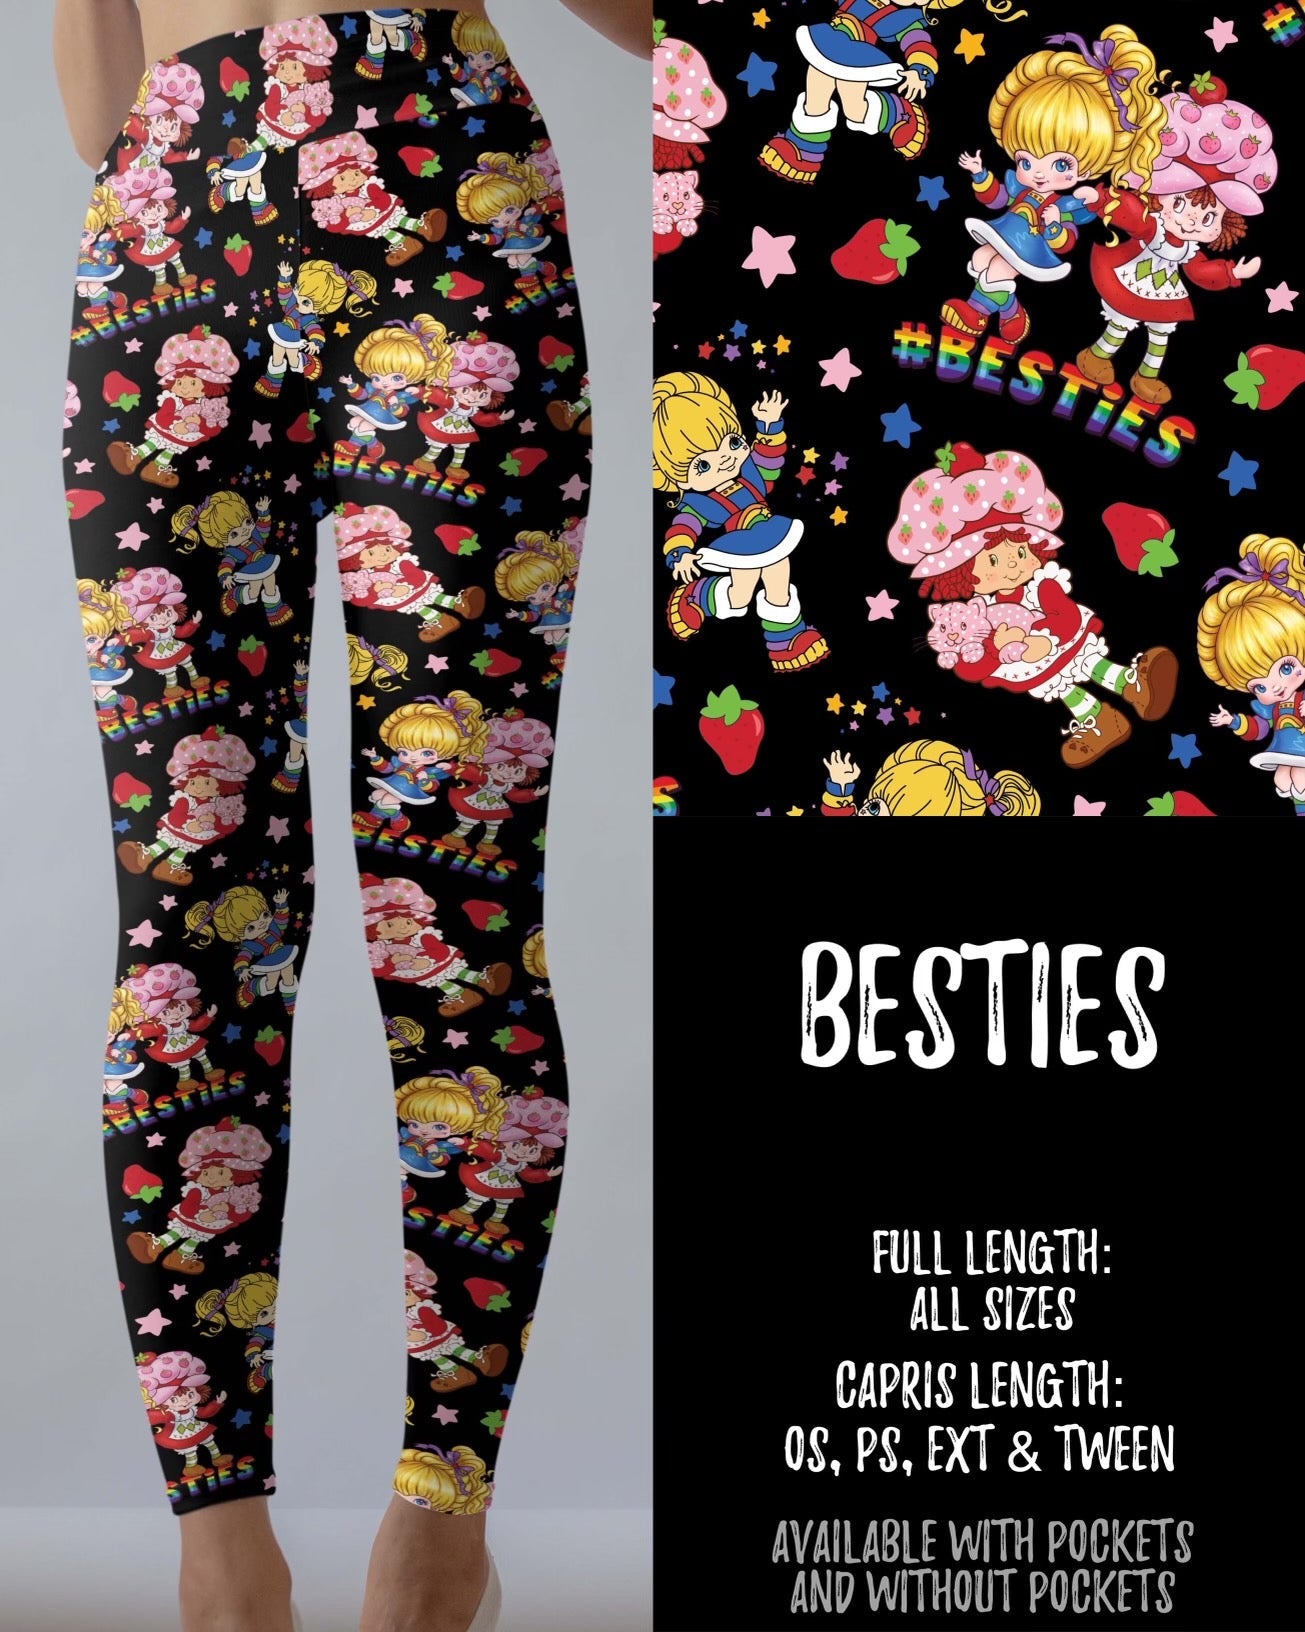 Besties Capri Leggings with and without Pockets